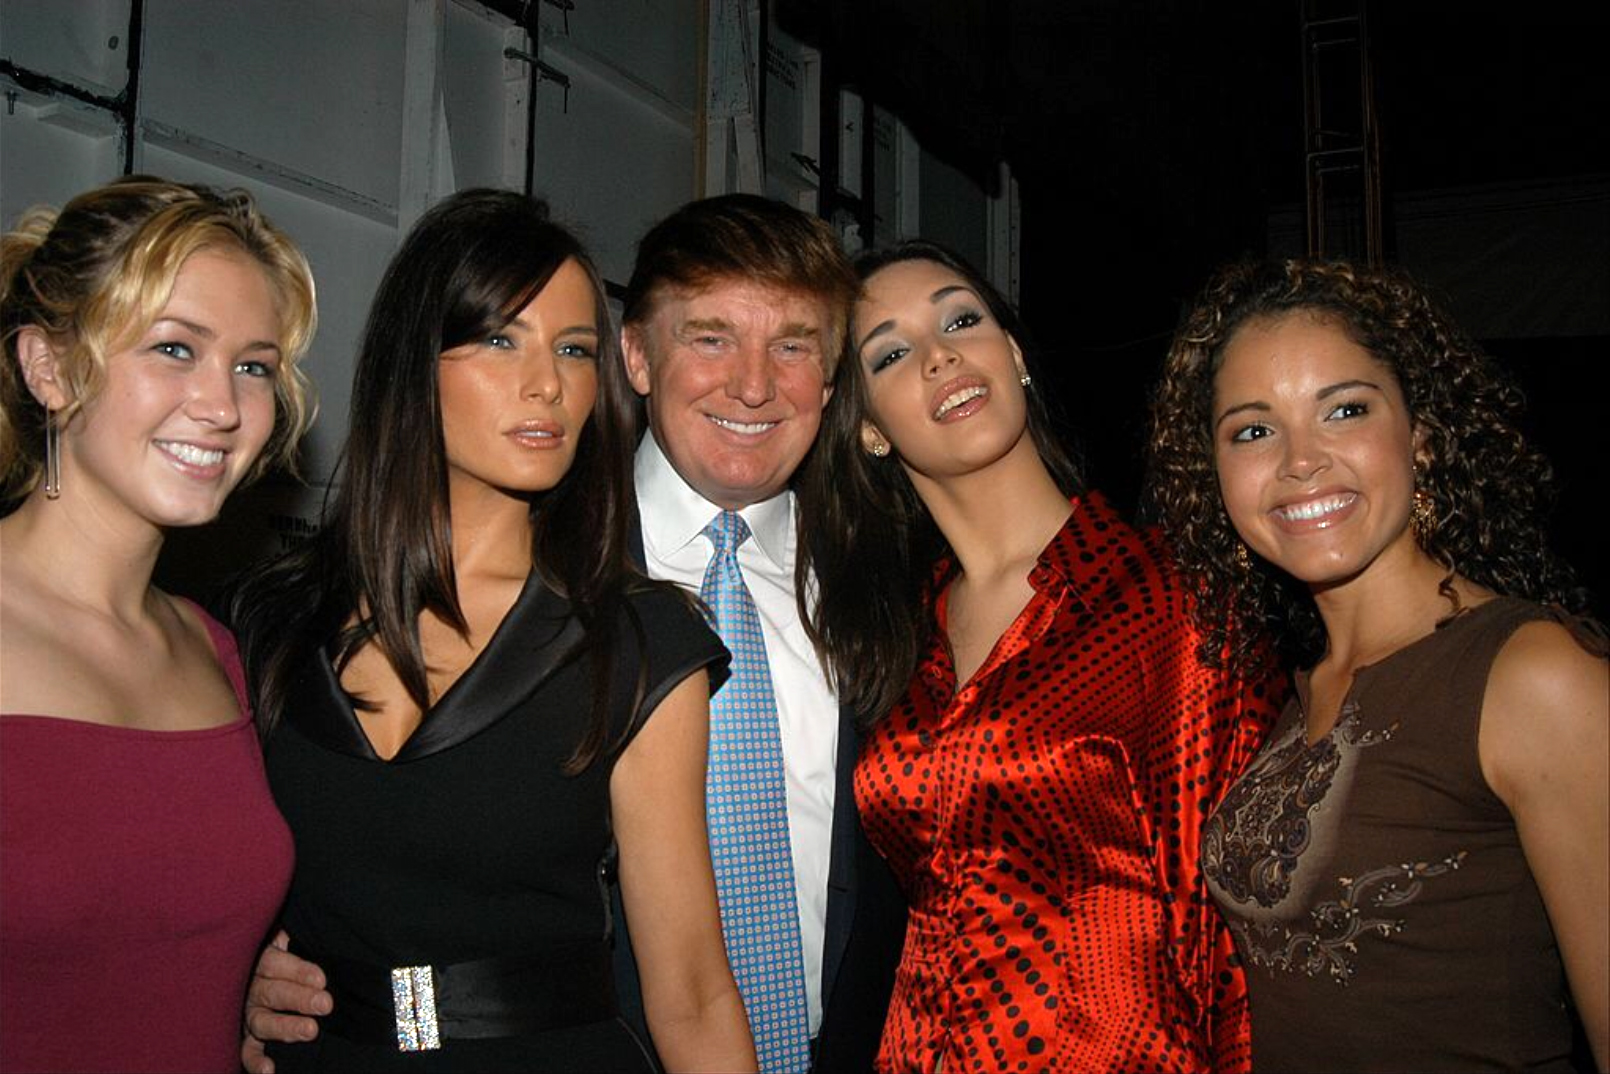 Behind The Crown 03 Miss Universe Owner Donald Trump Is Joined By Miss Teen Usa Tami Farrell Wife Melania Trump Miss Universe Amelia Vega And Miss Usa Susie Castillo Backstage